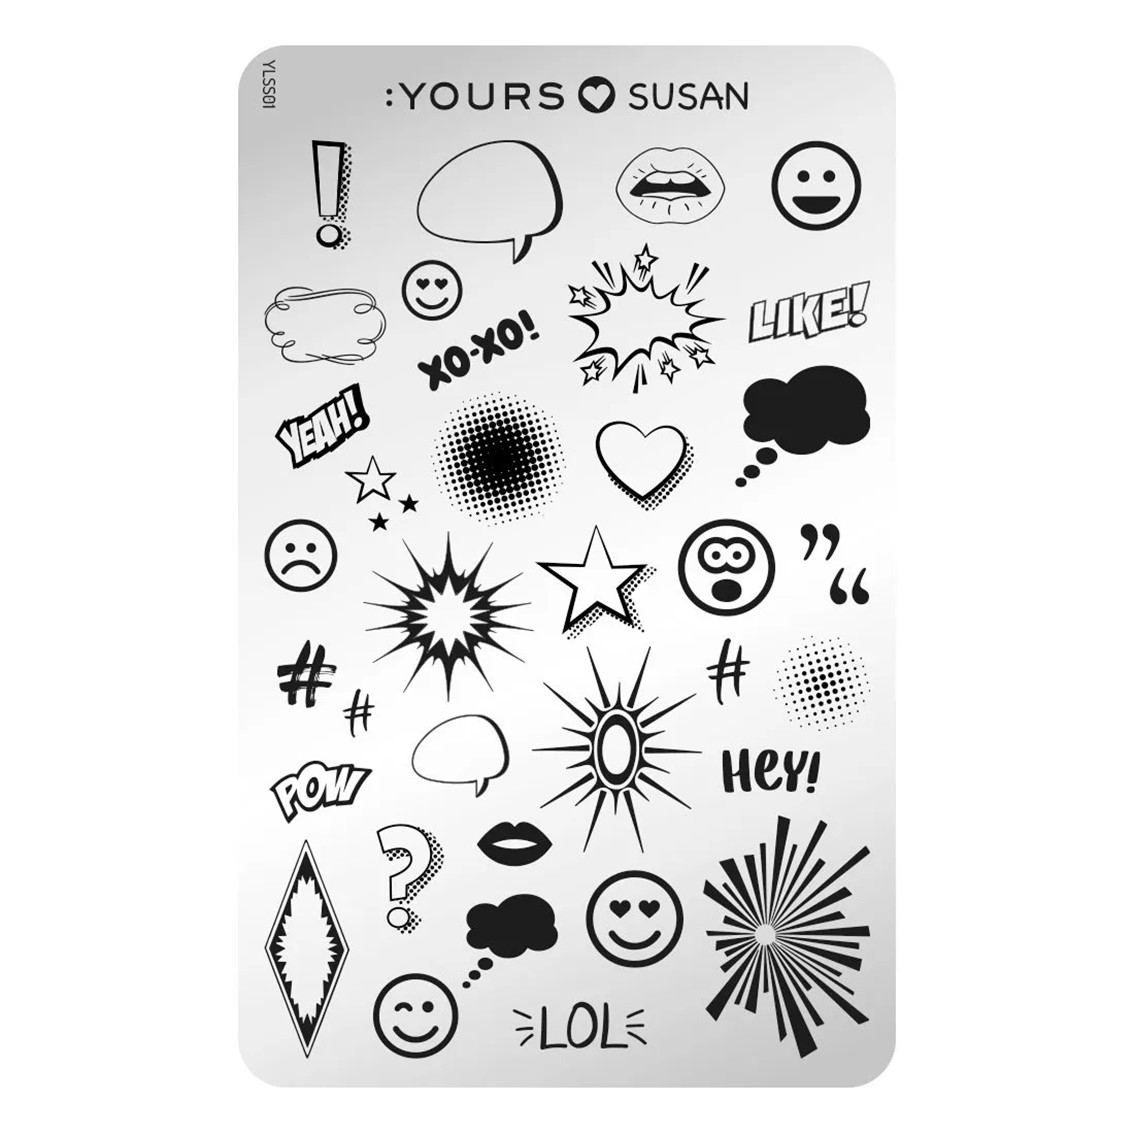 :YOURS ♥ Susan | YSS01 Cartoon Style